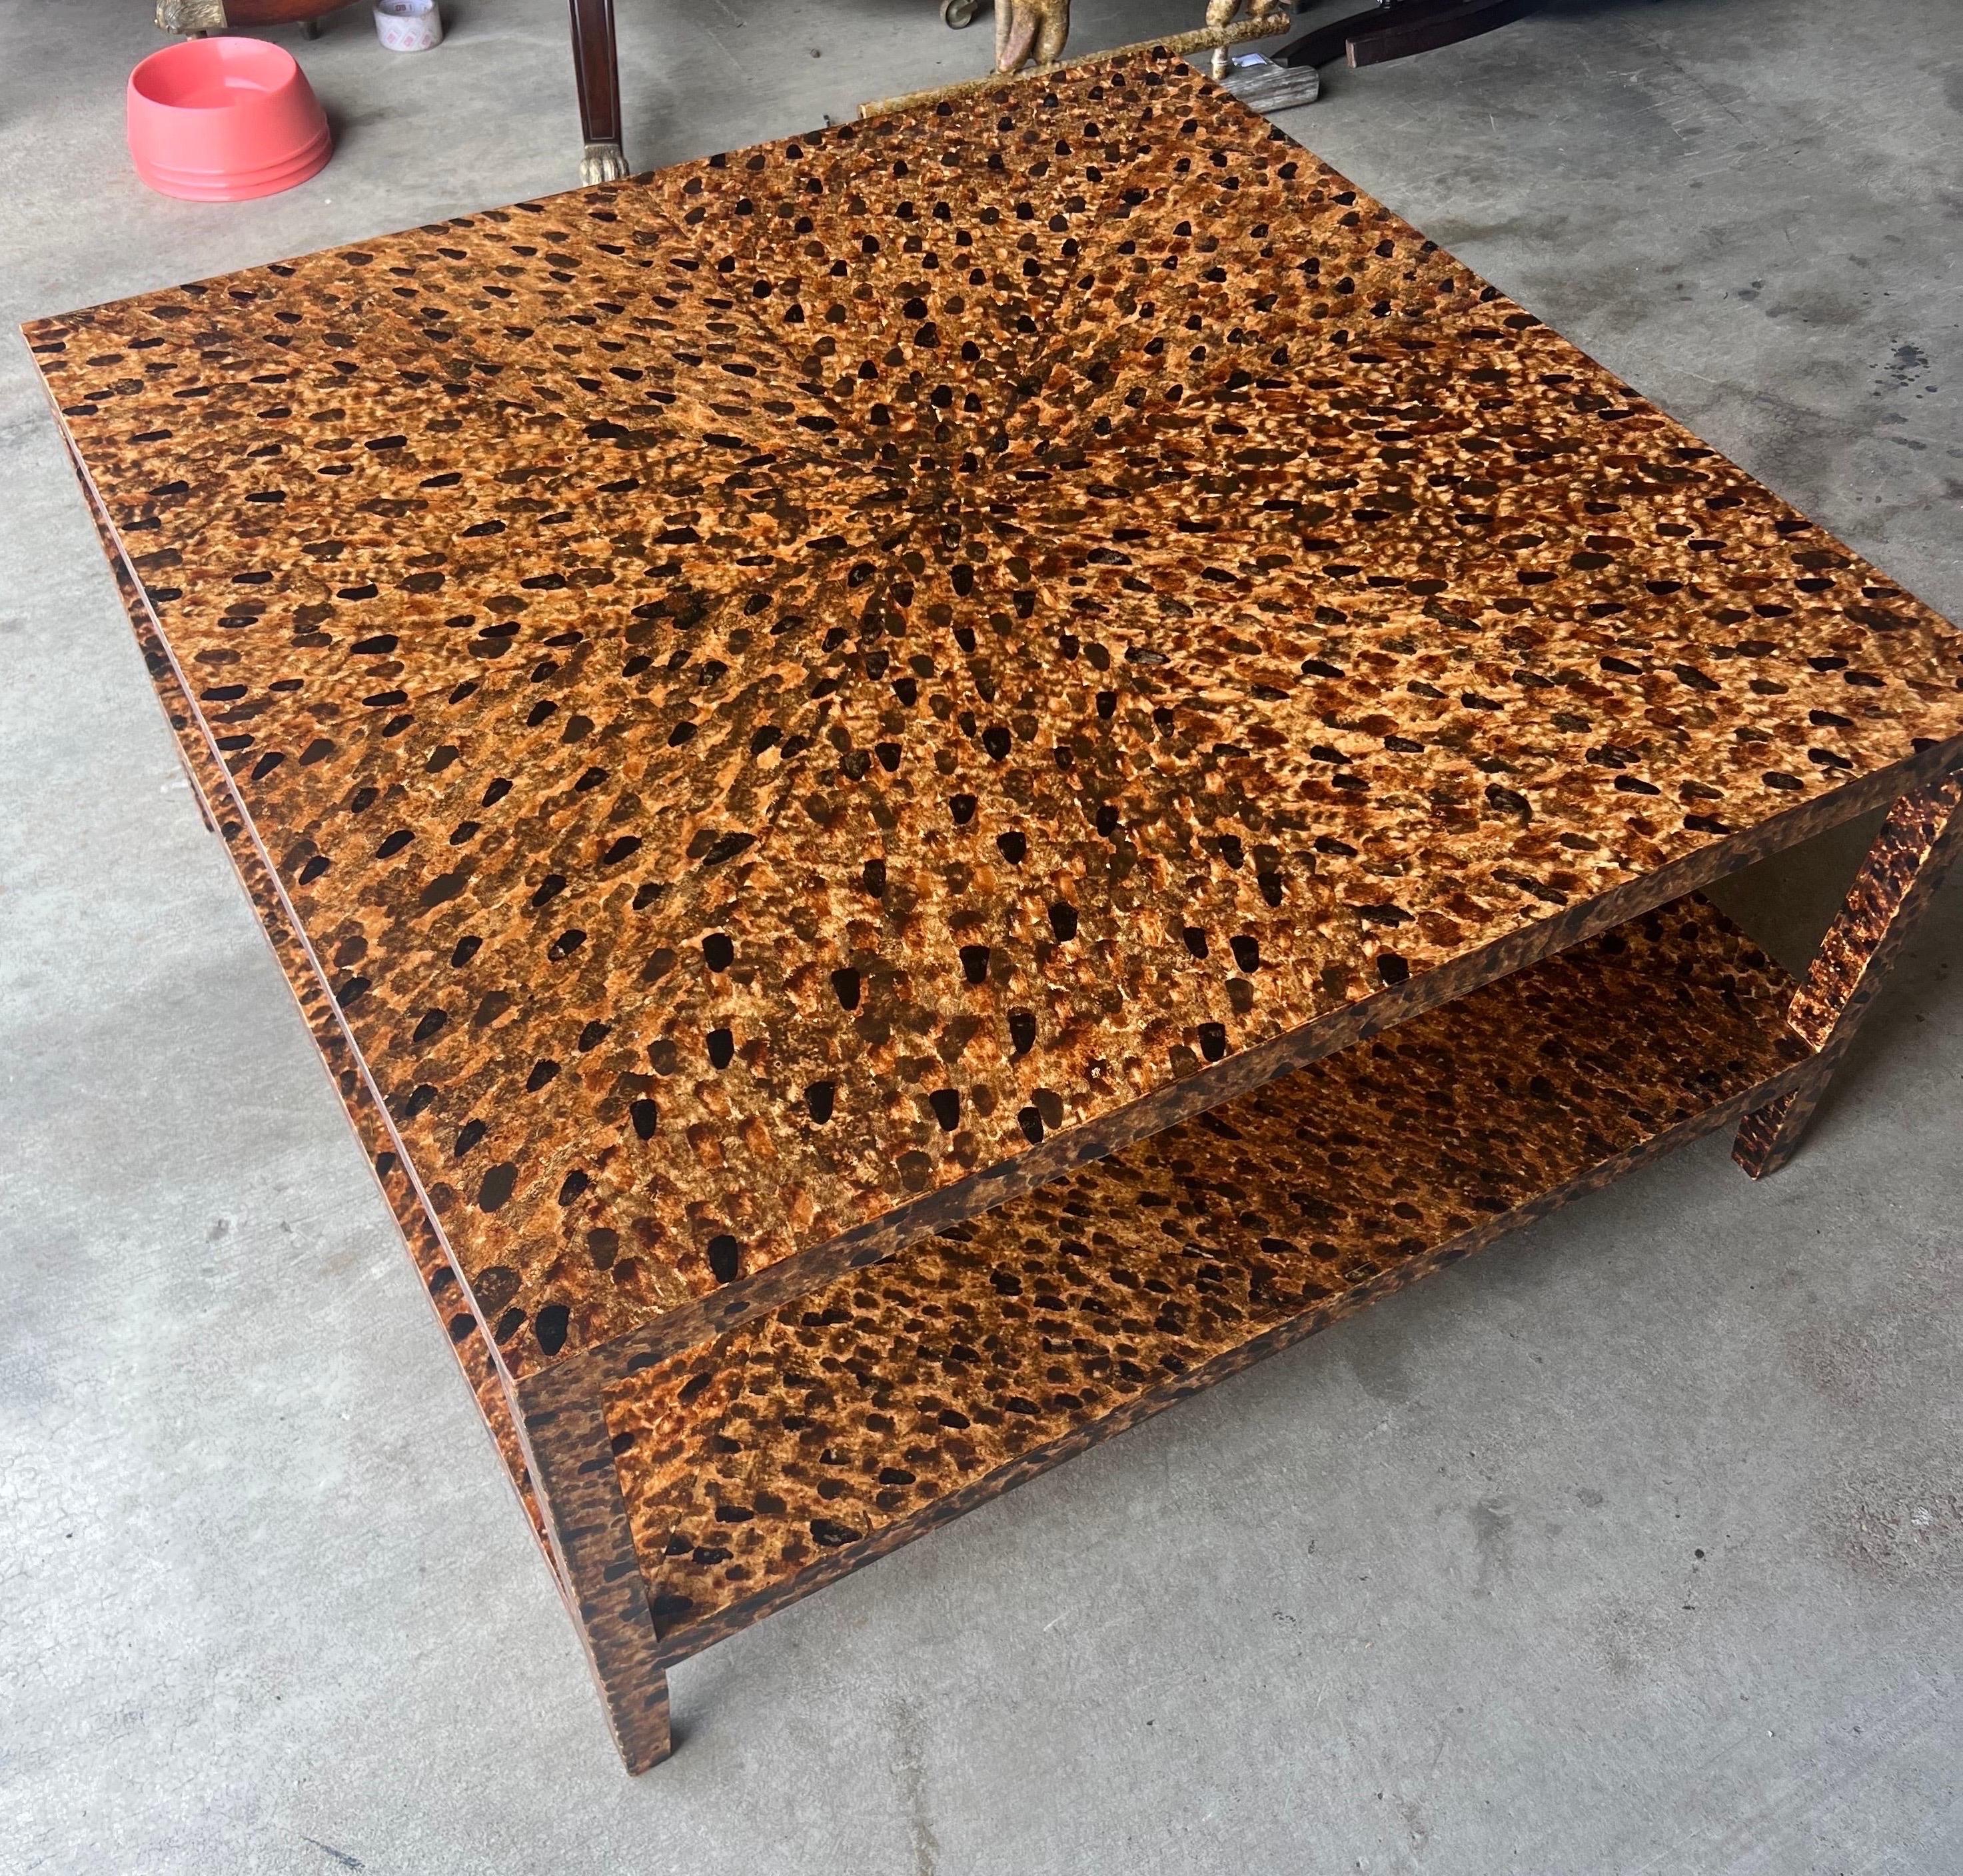 Custom made to order cocktail tables by “The Fabulous Things” with hand painted finishes. The one shown here is in our faux tortoiseshell. 

Standard size(shown) of 40x40x20” high can be finished in 4-6 weeks. Custom sizes also available and ready